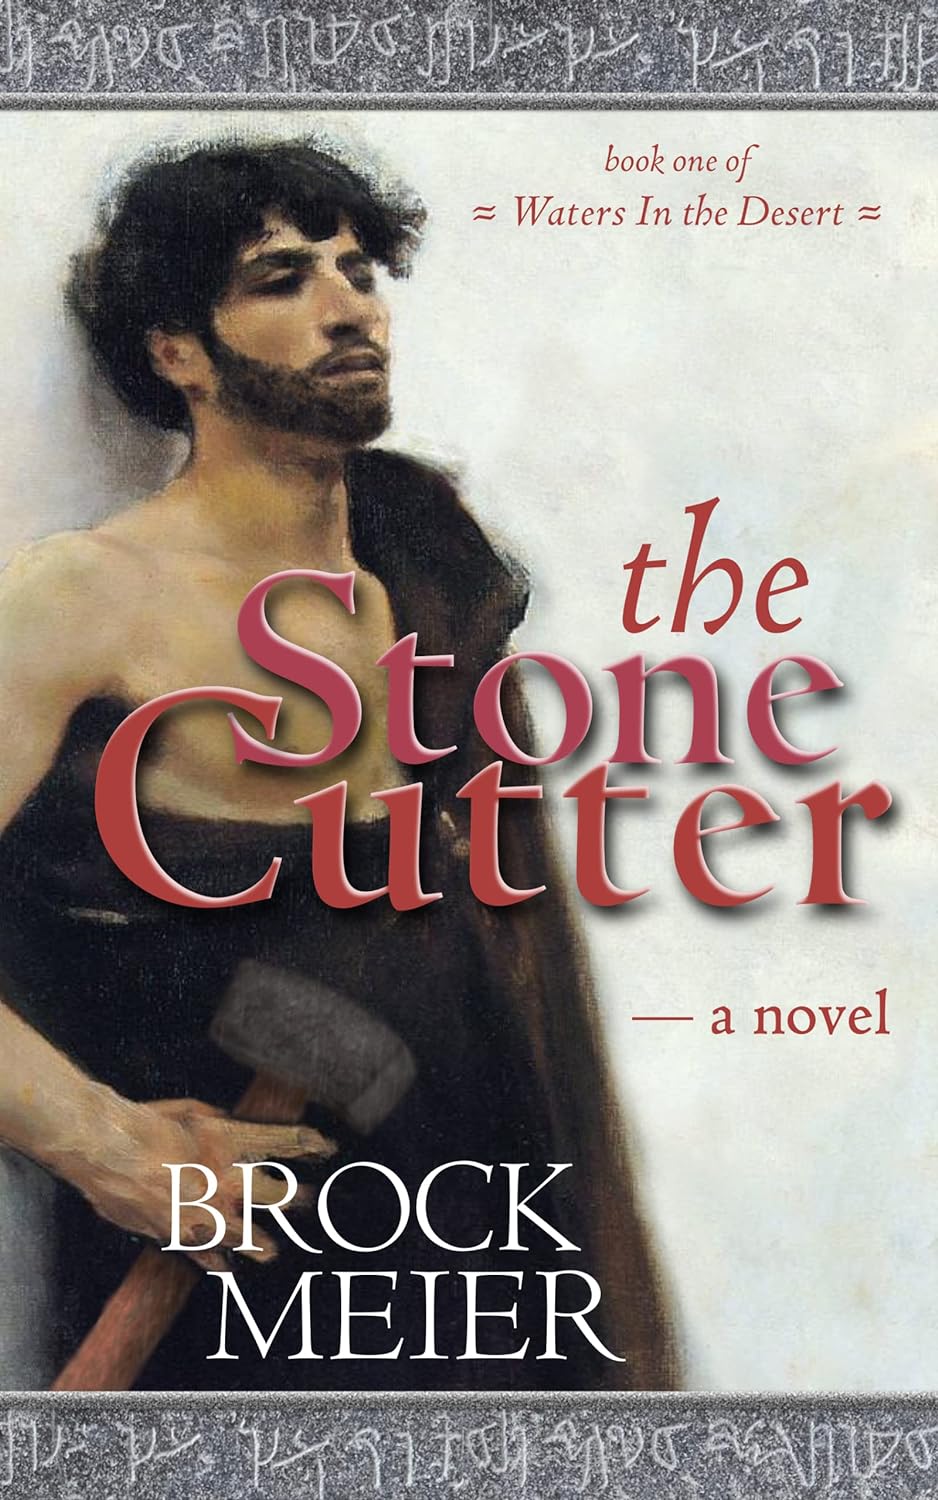 The Stone Cutter